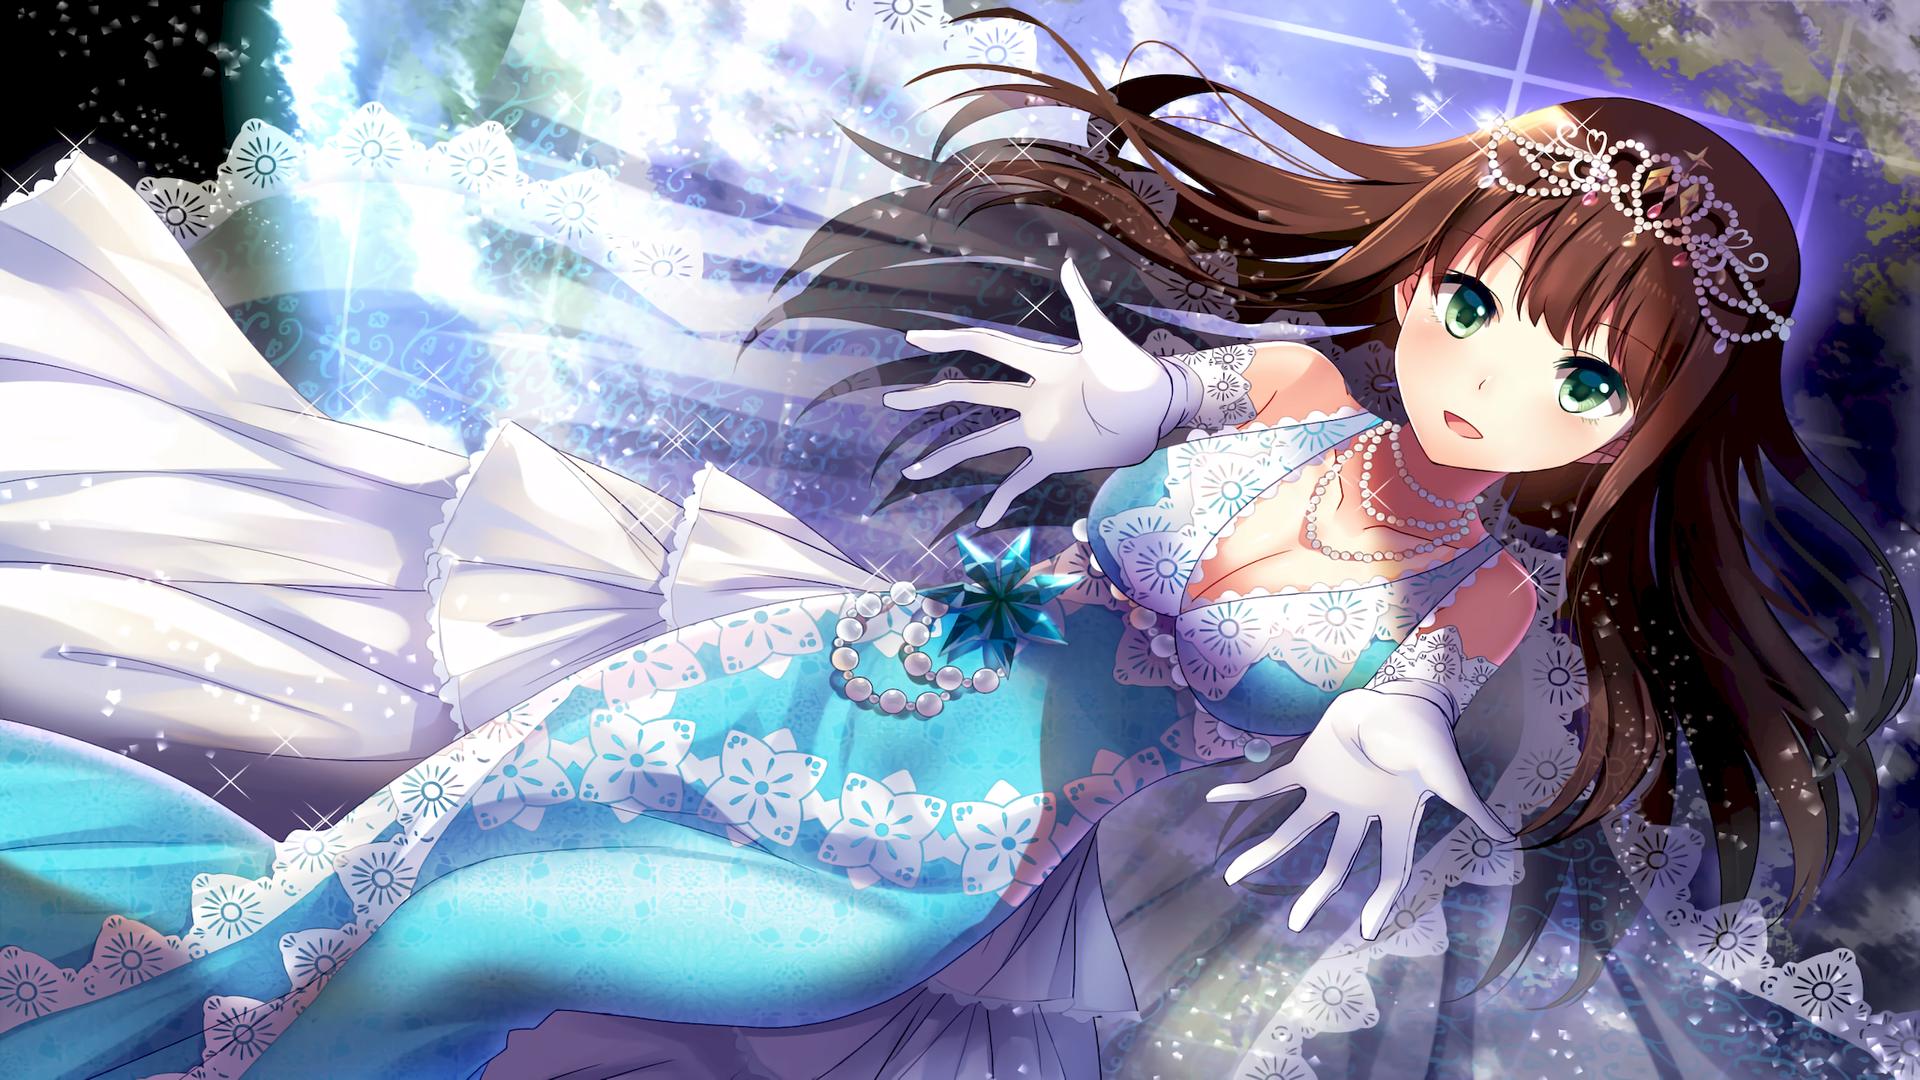 Brown Haired Anime Princess Wallpapers - Wallpaper Cave.